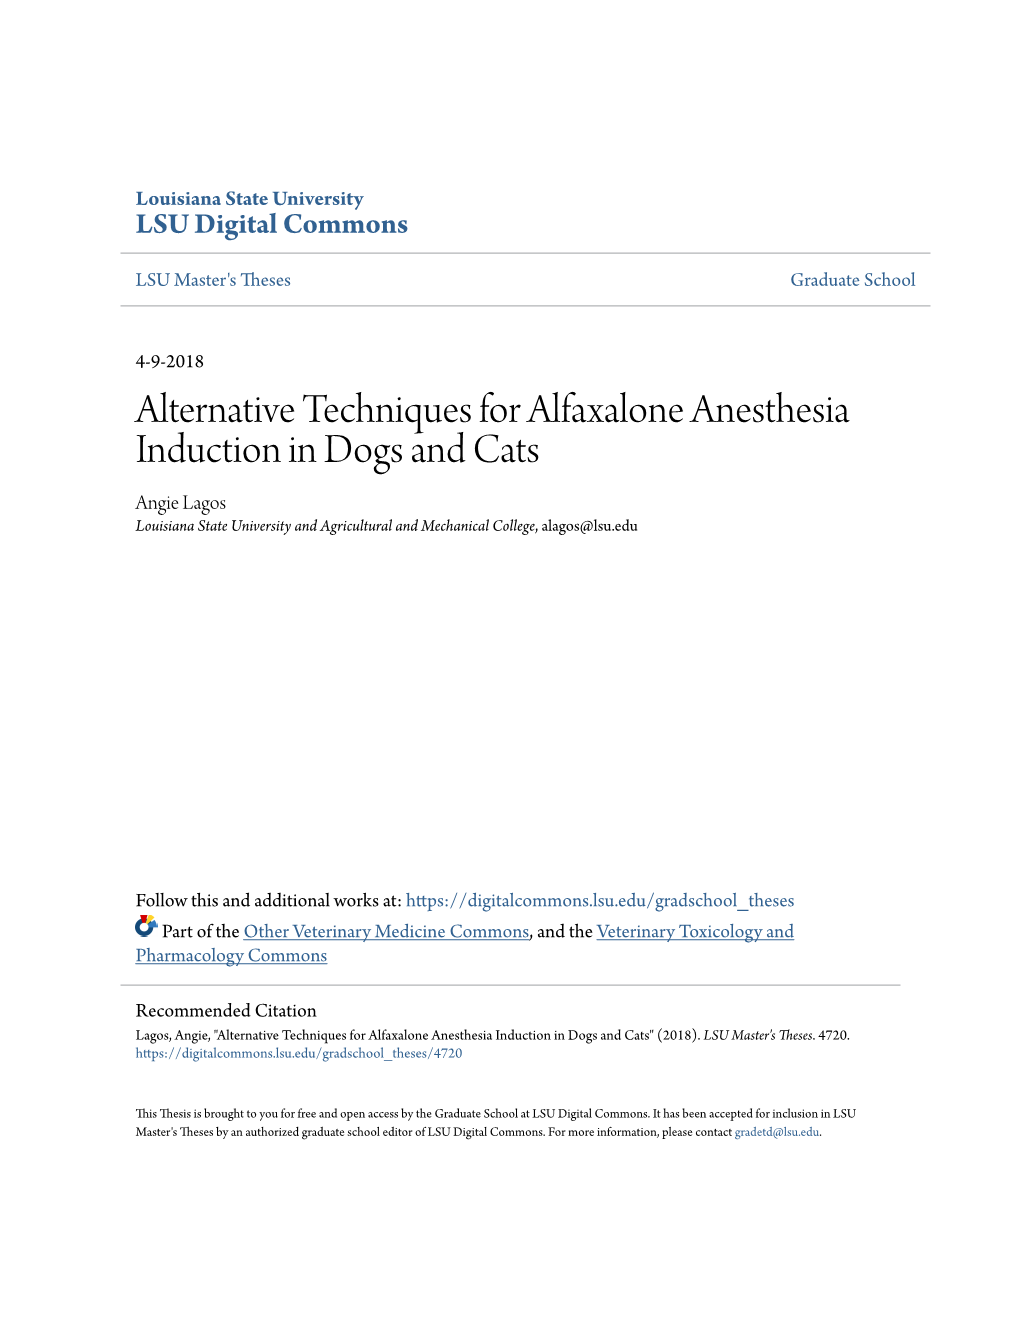 Alternative Techniques for Alfaxalone Anesthesia Induction in Dogs And